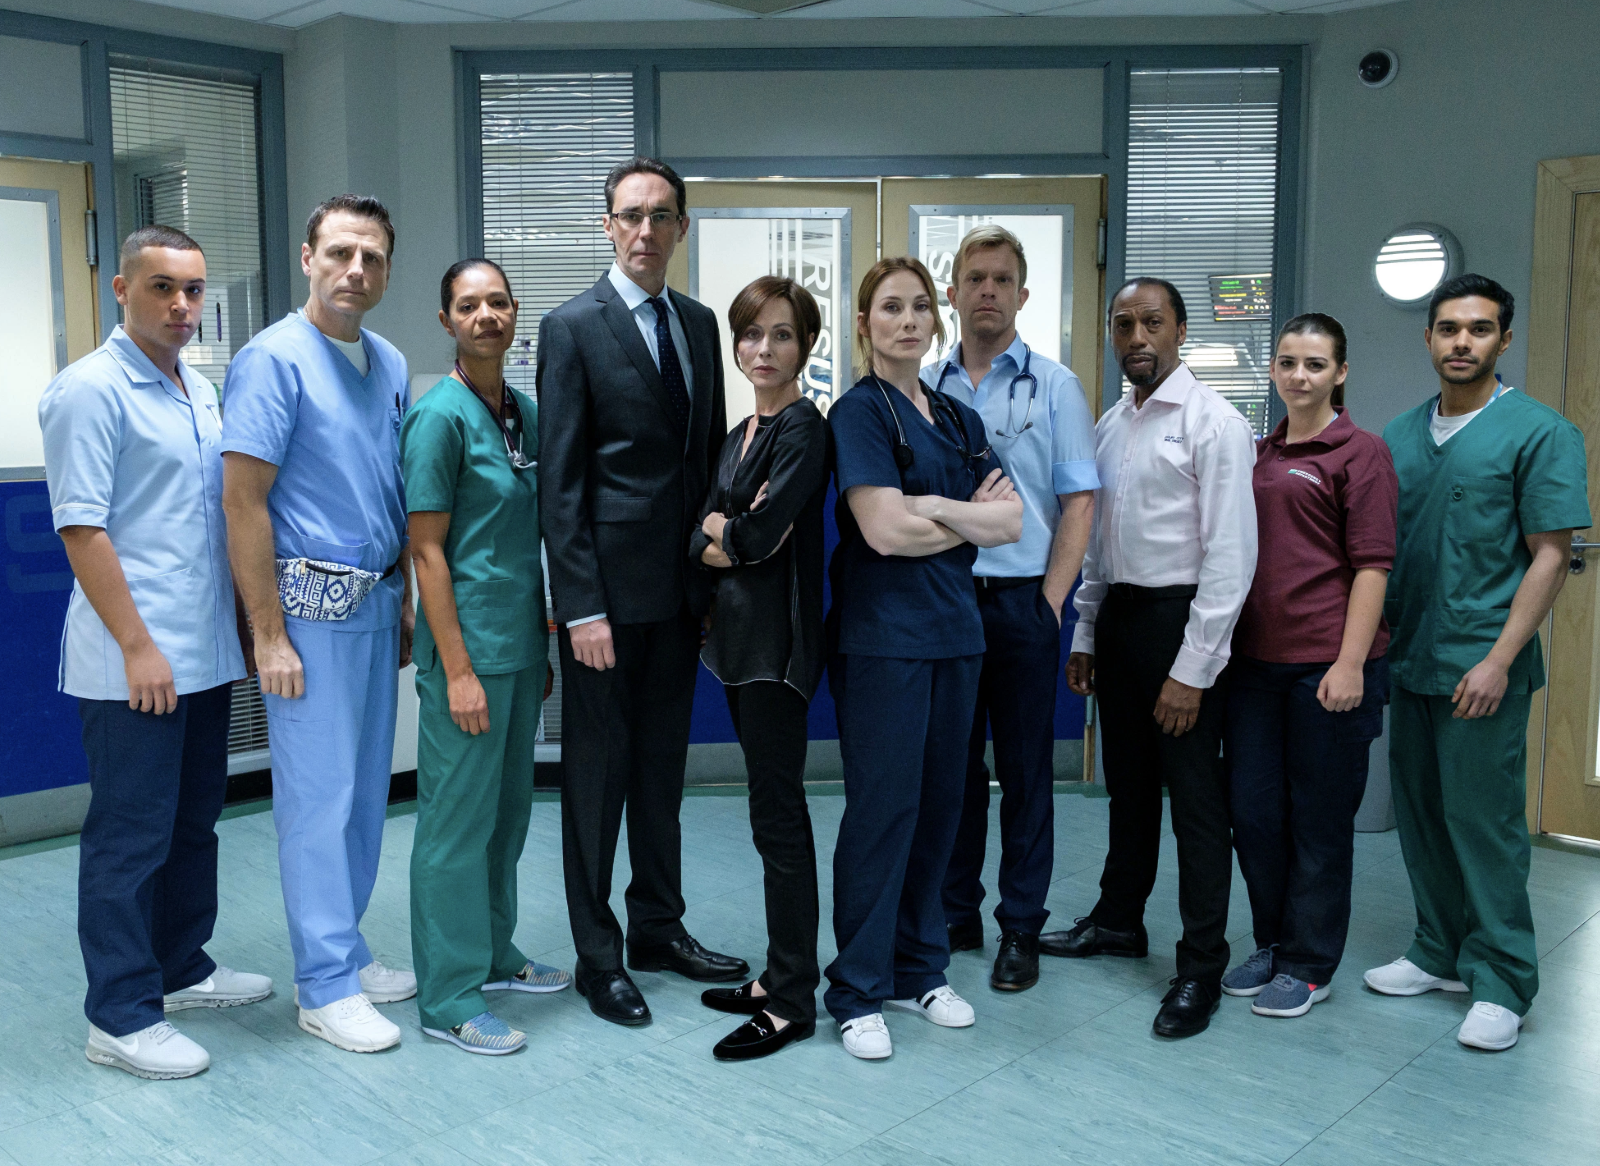 The cast of BBC's Casualty